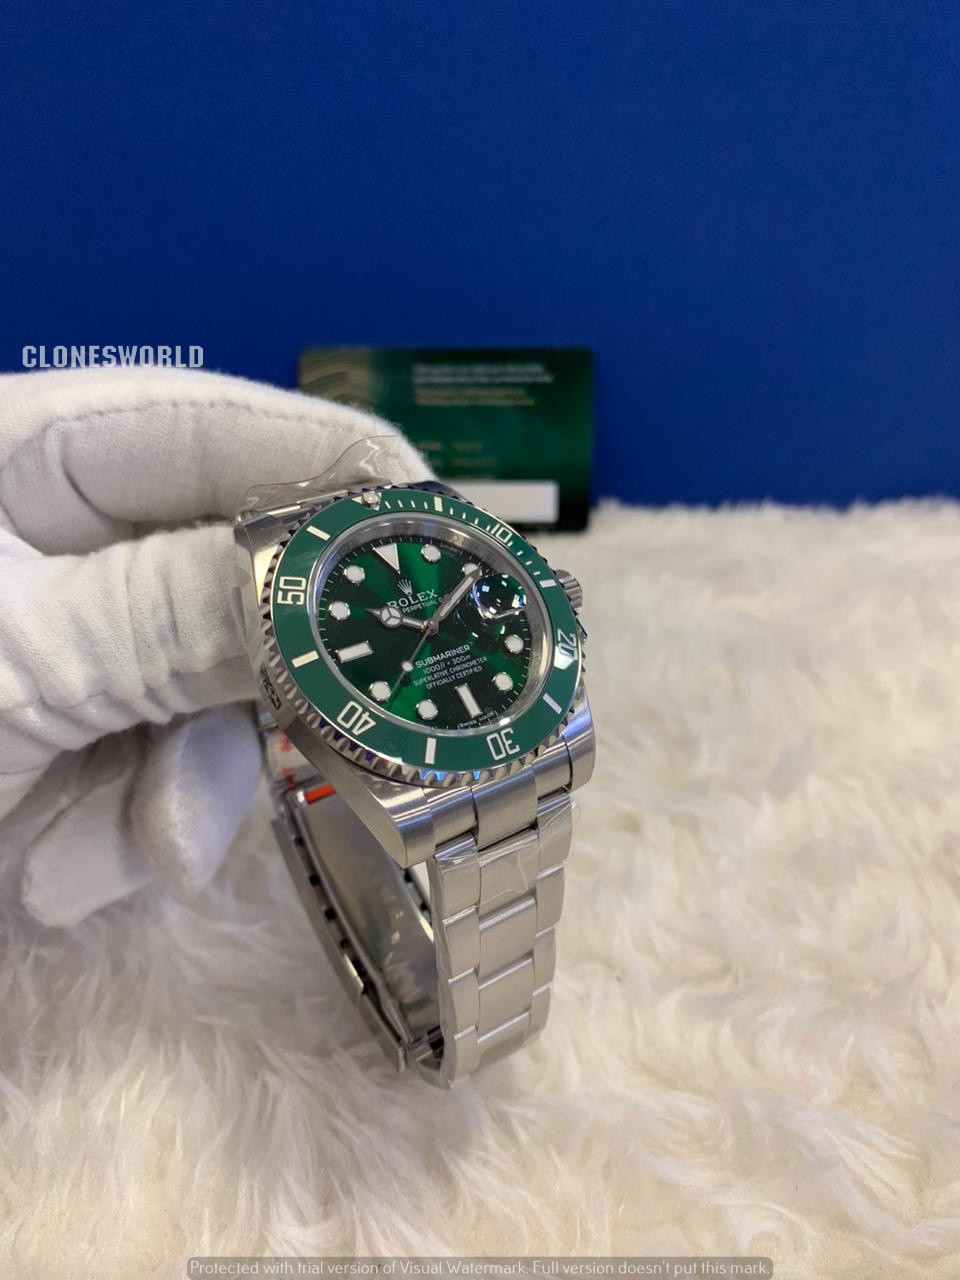 Rolex Submariner Date Hulk 116610LV 2019 Edition for $22,320 for sale from  a Trusted Seller on Chrono24